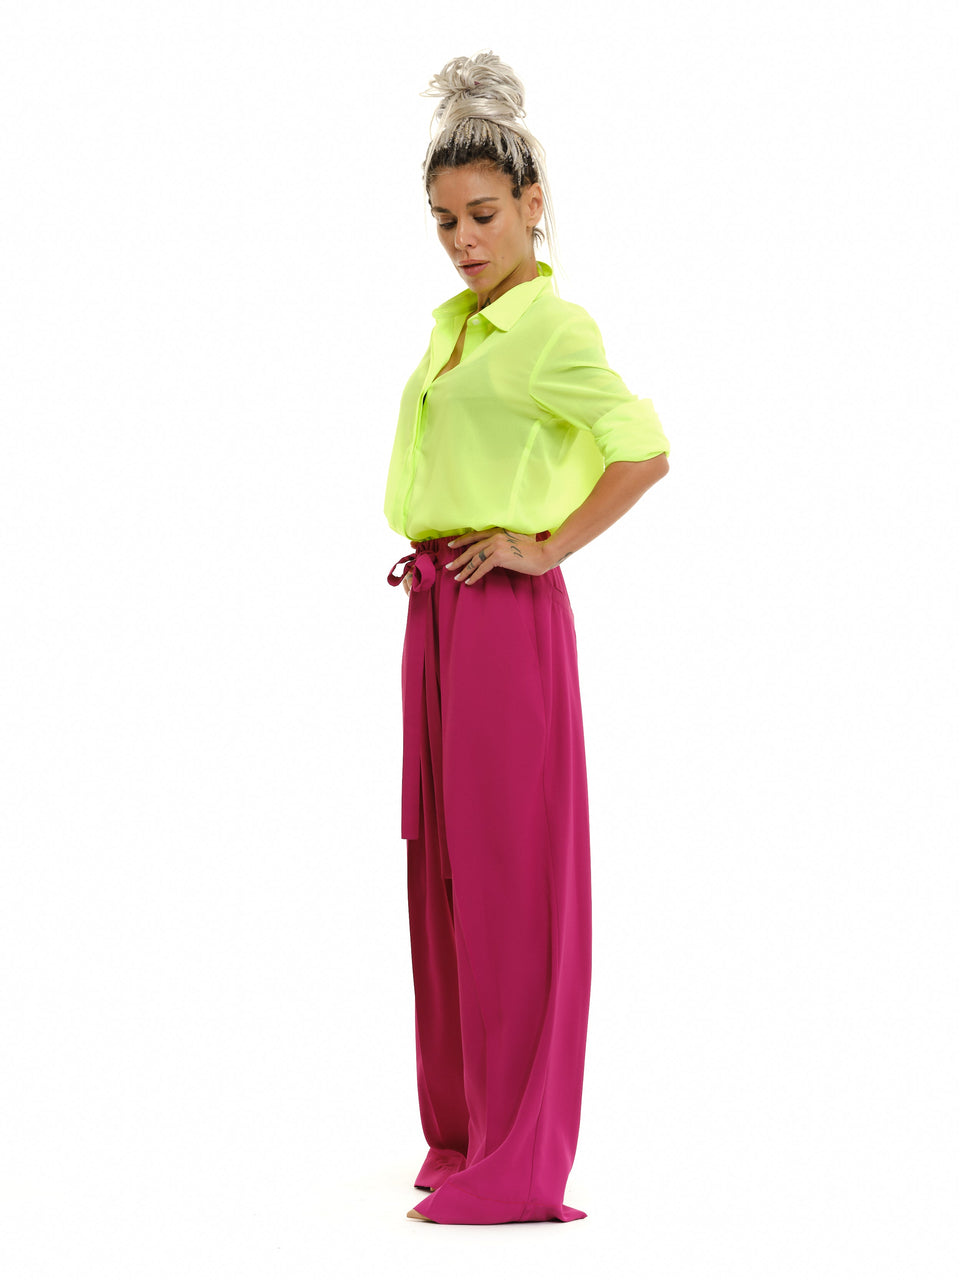 NEON GREEN TOP + MAGENTA PANTS OUTFIT SET